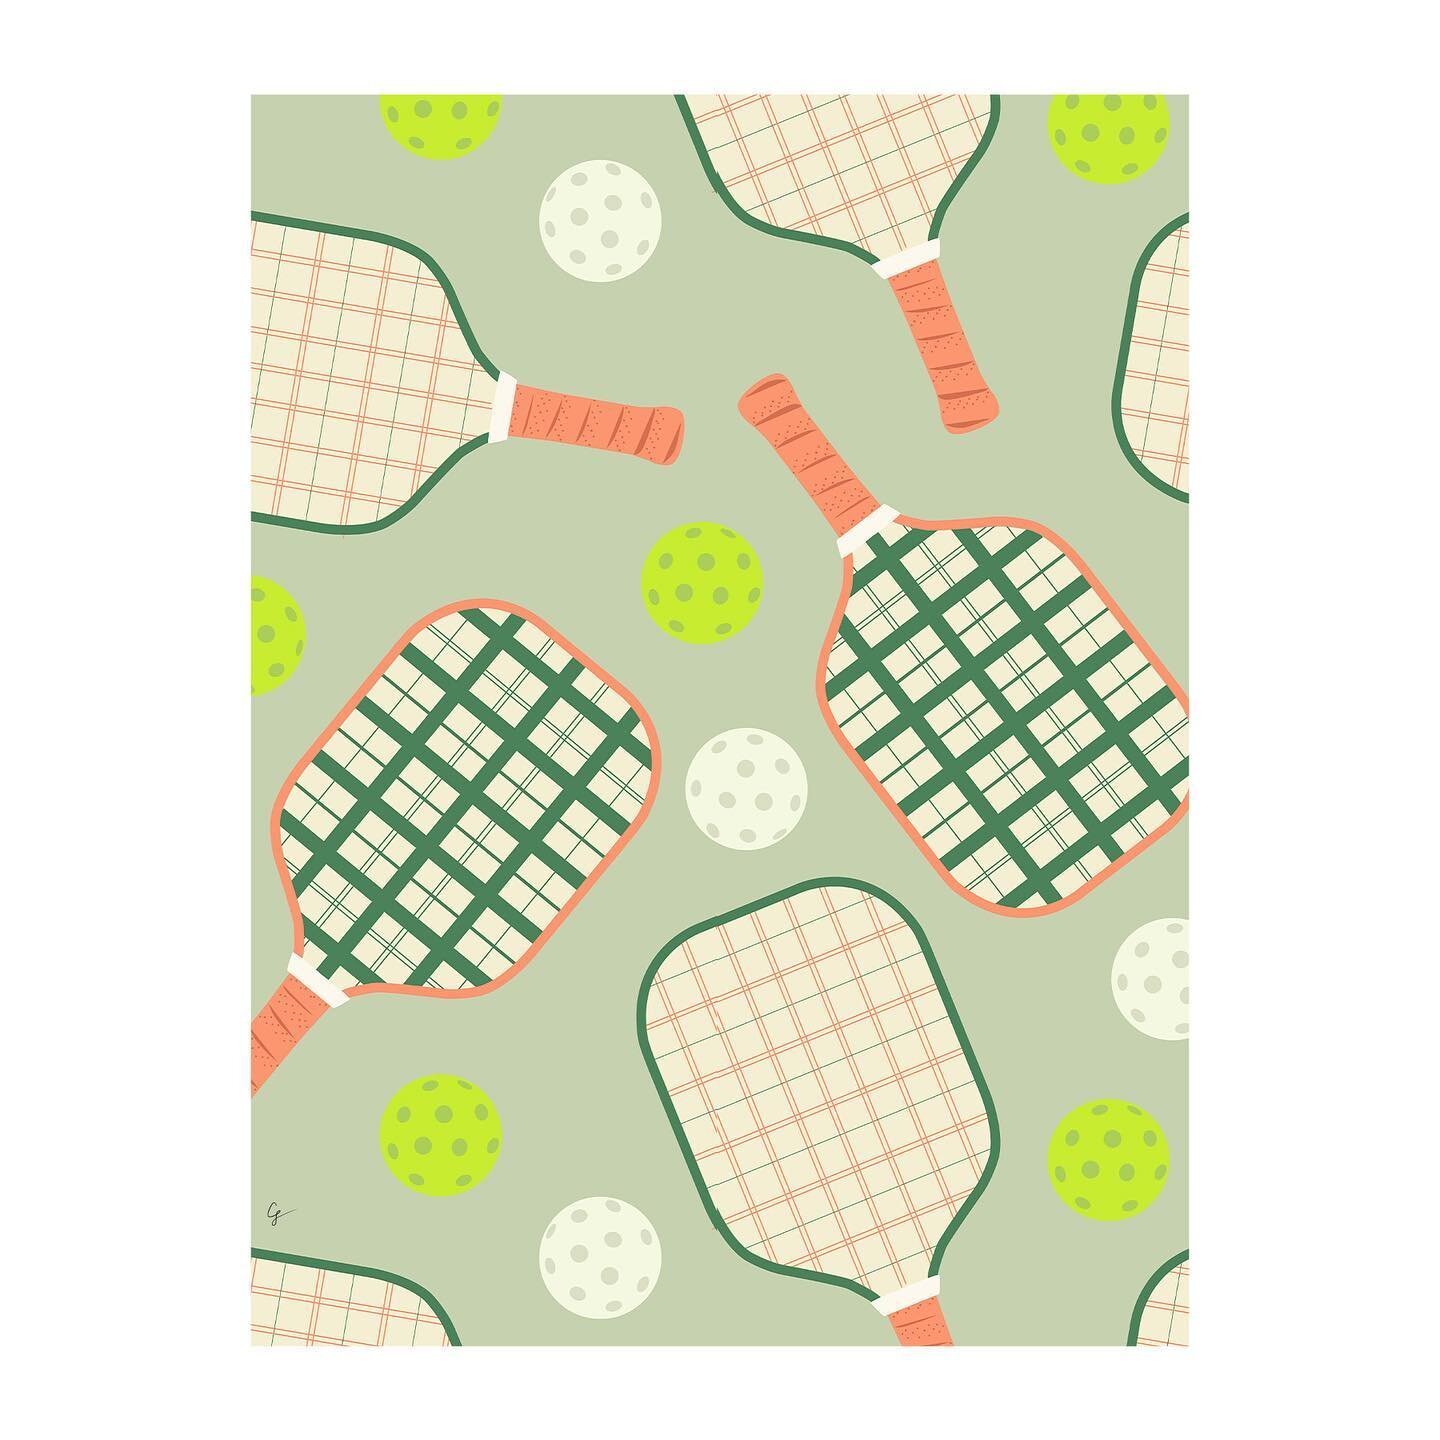 Pickleball Paddles and Patterns

Shop this print [ link in profile ]